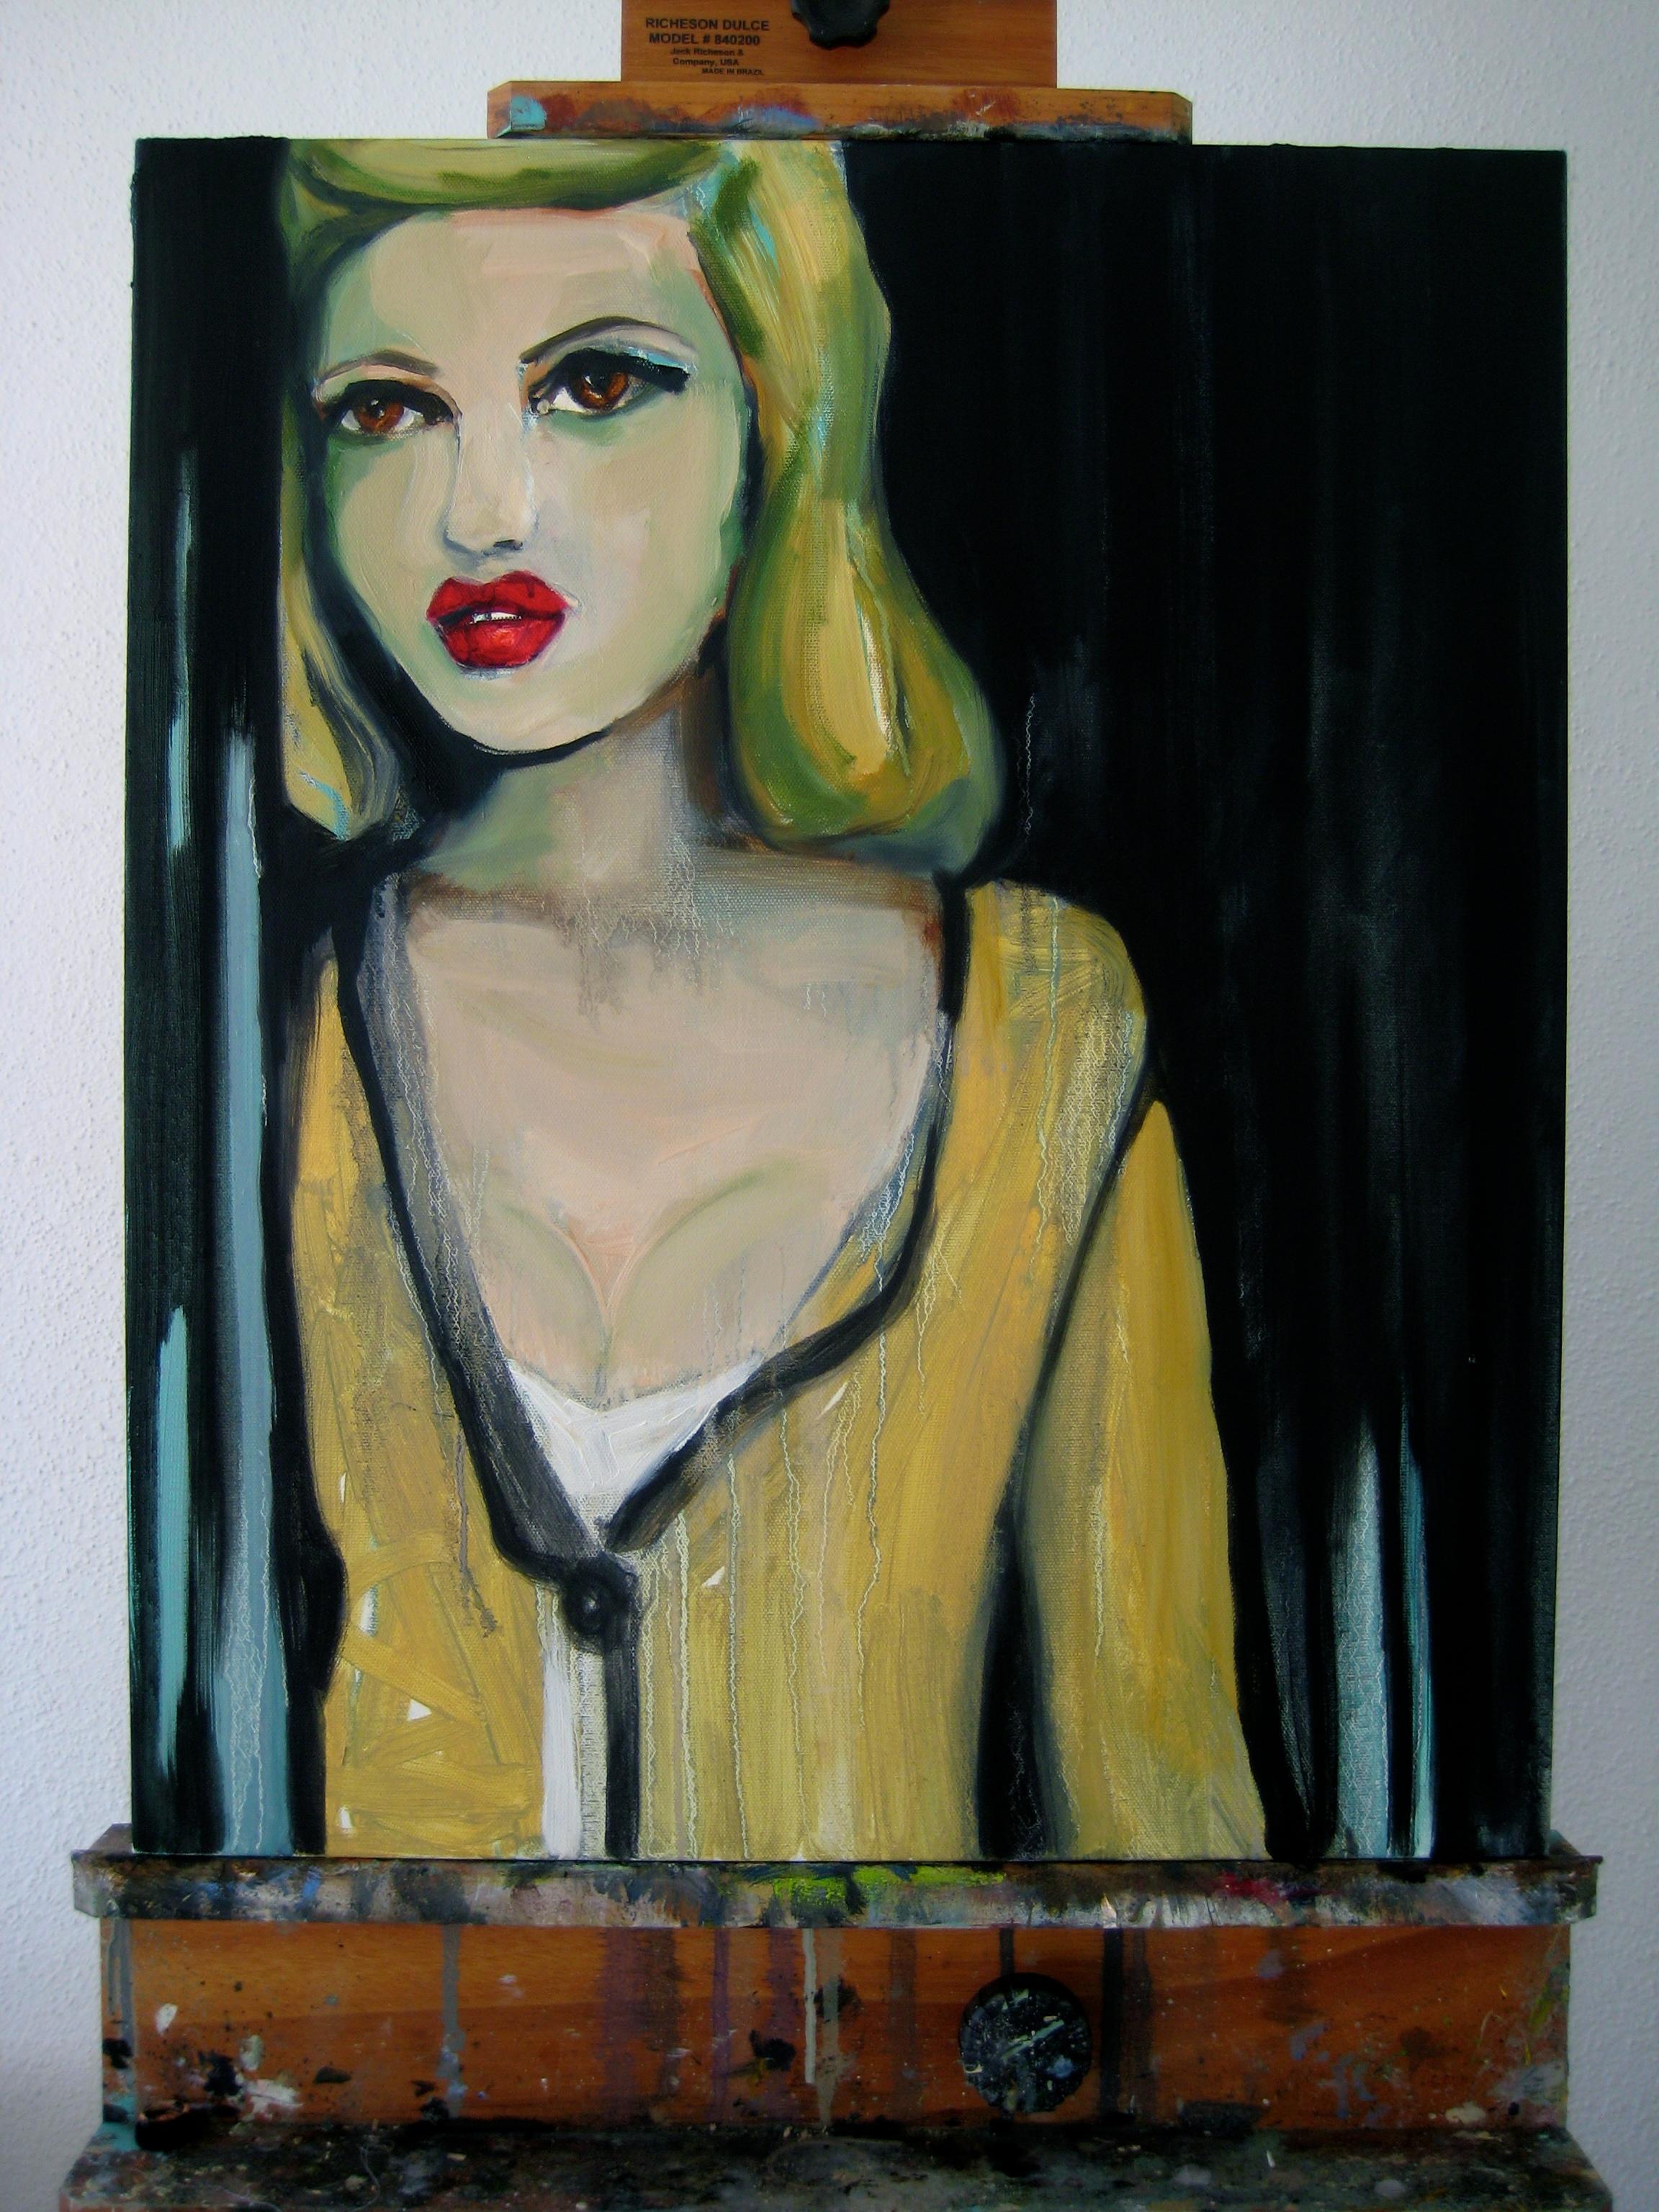 <p>Artist Comments<br> This painting features a really vibrant palette with bold, gestural brushwork. I feel the work conveys a similarly clear narrative with a beautiful, blonde model poised against a pillar and dark curtain backdrop. This piece